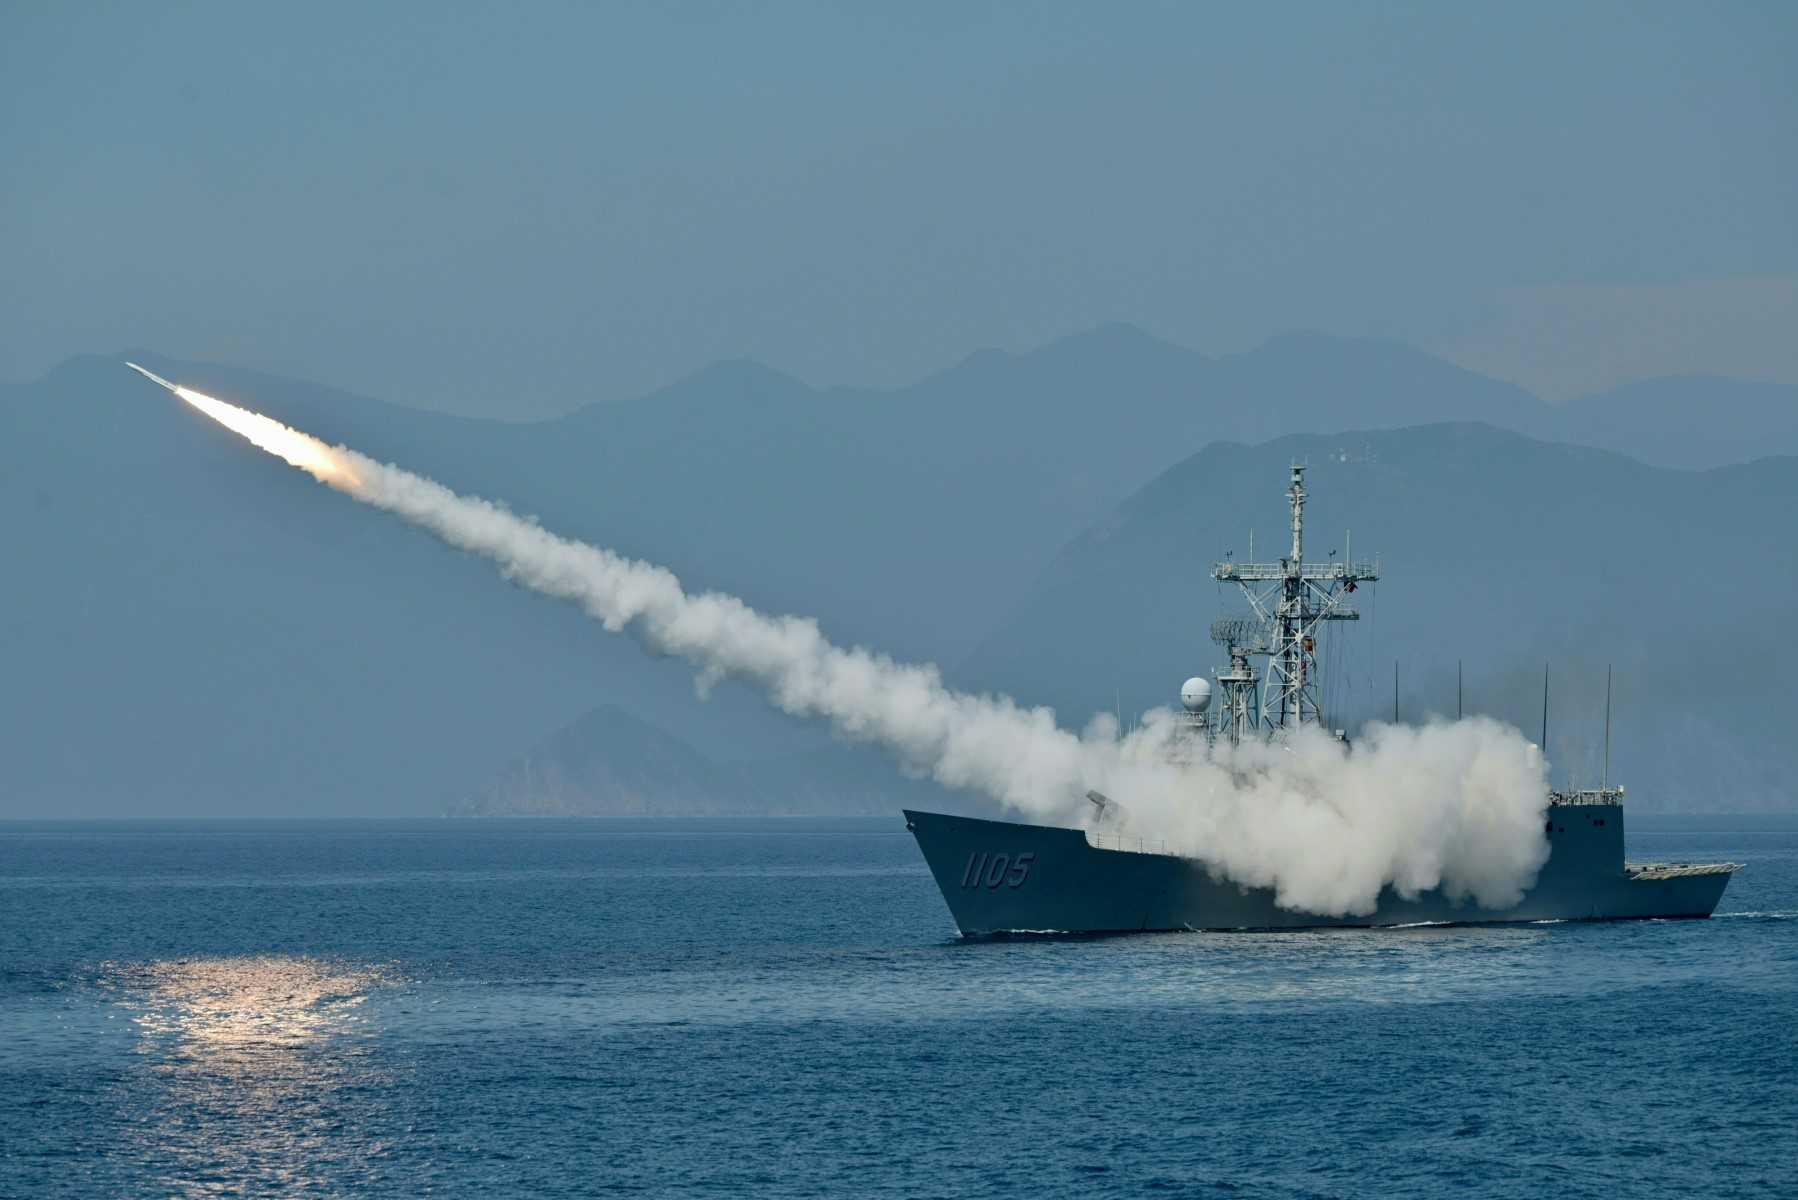 Taiwanese navy launches a US-made Standard missile from a frigate during the annual Han Kuang Drill, on the sea near the Suao navy harbor in Yilan county on July 26. Photo: AFP 